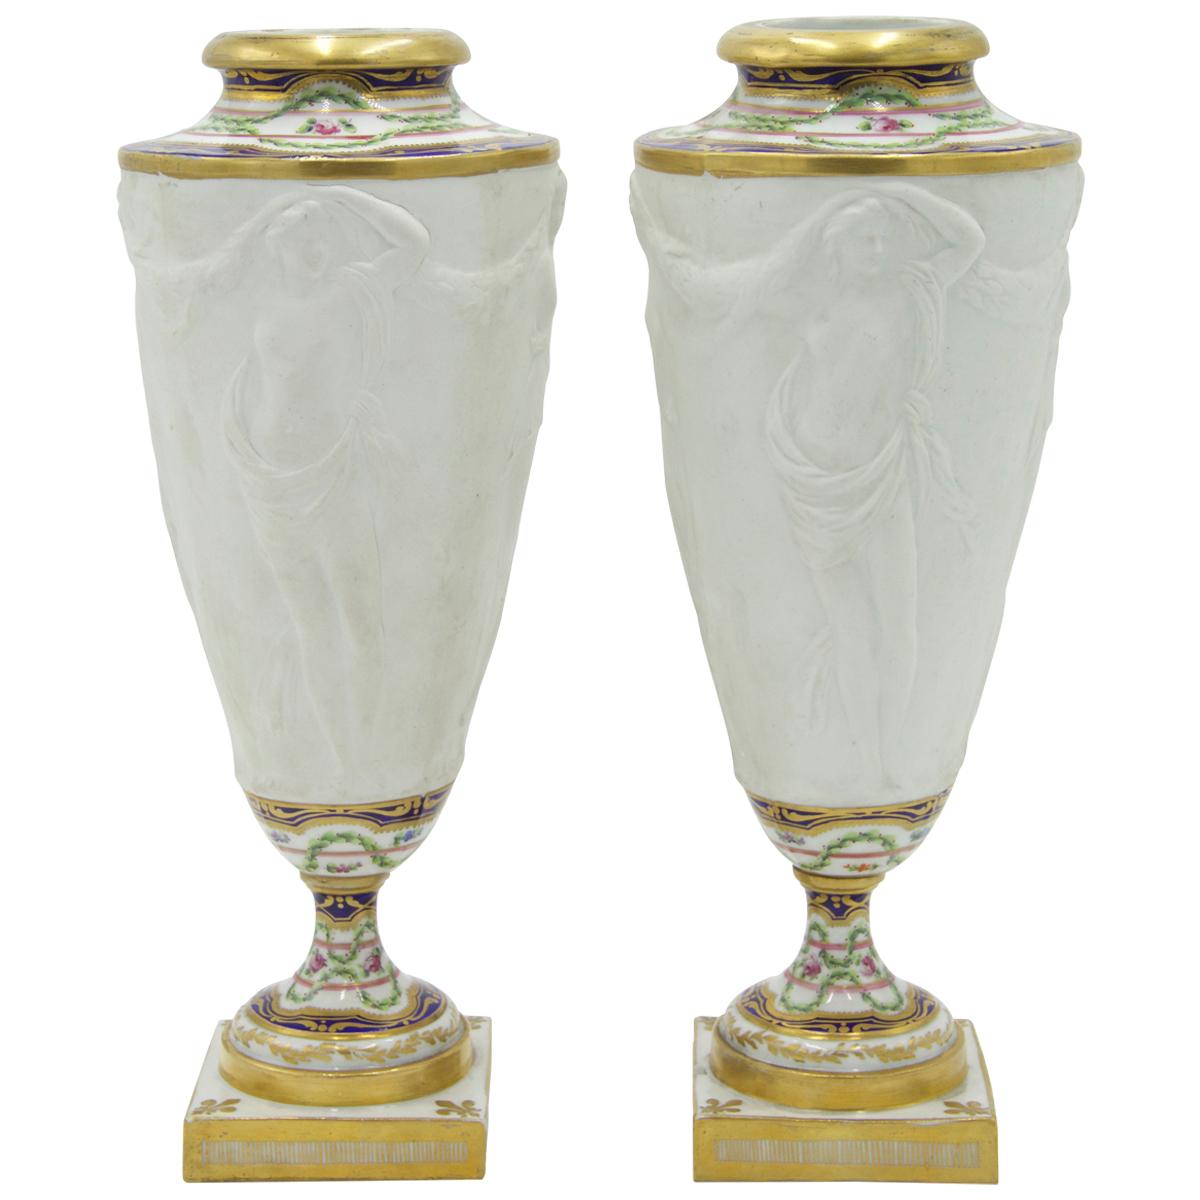 Pair of French Victorian Sevres Porcelain Urns